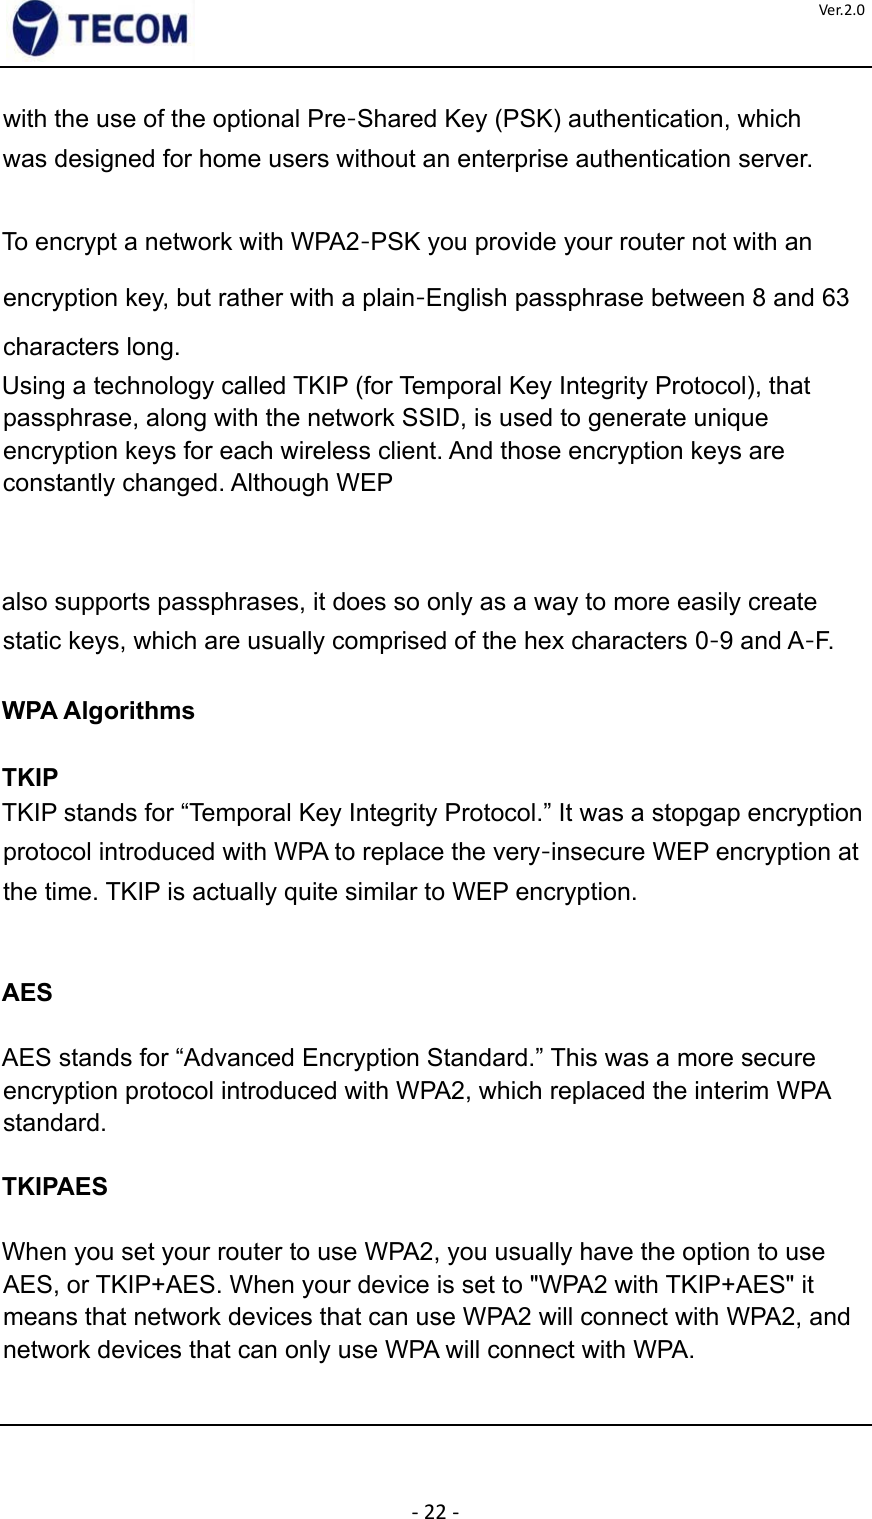  ‐22‐Ver.2.0with the use of the optional Pre‐Shared Key (PSK) authentication, which was designed for home users without an enterprise authentication server.    To encrypt a network with WPA2‐PSK you provide your router not with an encryption key, but rather with a plain‐English passphrase between 8 and 63 characters long.  Using a technology called TKIP (for Temporal Key Integrity Protocol), that passphrase, along with the network SSID, is used to generate unique encryption keys for each wireless client. And those encryption keys are constantly changed. Although WEP      also supports passphrases, it does so only as a way to more easily create static keys, which are usually comprised of the hex characters 0‐9 and A‐F.  WPA Algorithms  TKIP  TKIP stands for “Temporal Key Integrity Protocol.” It was a stopgap encryption protocol introduced with WPA to replace the very‐insecure WEP encryption at the time. TKIP is actually quite similar to WEP encryption.      AES    AES stands for “Advanced Encryption Standard.” This was a more secure encryption protocol introduced with WPA2, which replaced the interim WPA standard.    TKIPAES    When you set your router to use WPA2, you usually have the option to use AES, or TKIP+AES. When your device is set to &quot;WPA2 with TKIP+AES&quot; it means that network devices that can use WPA2 will connect with WPA2, and network devices that can only use WPA will connect with WPA.       